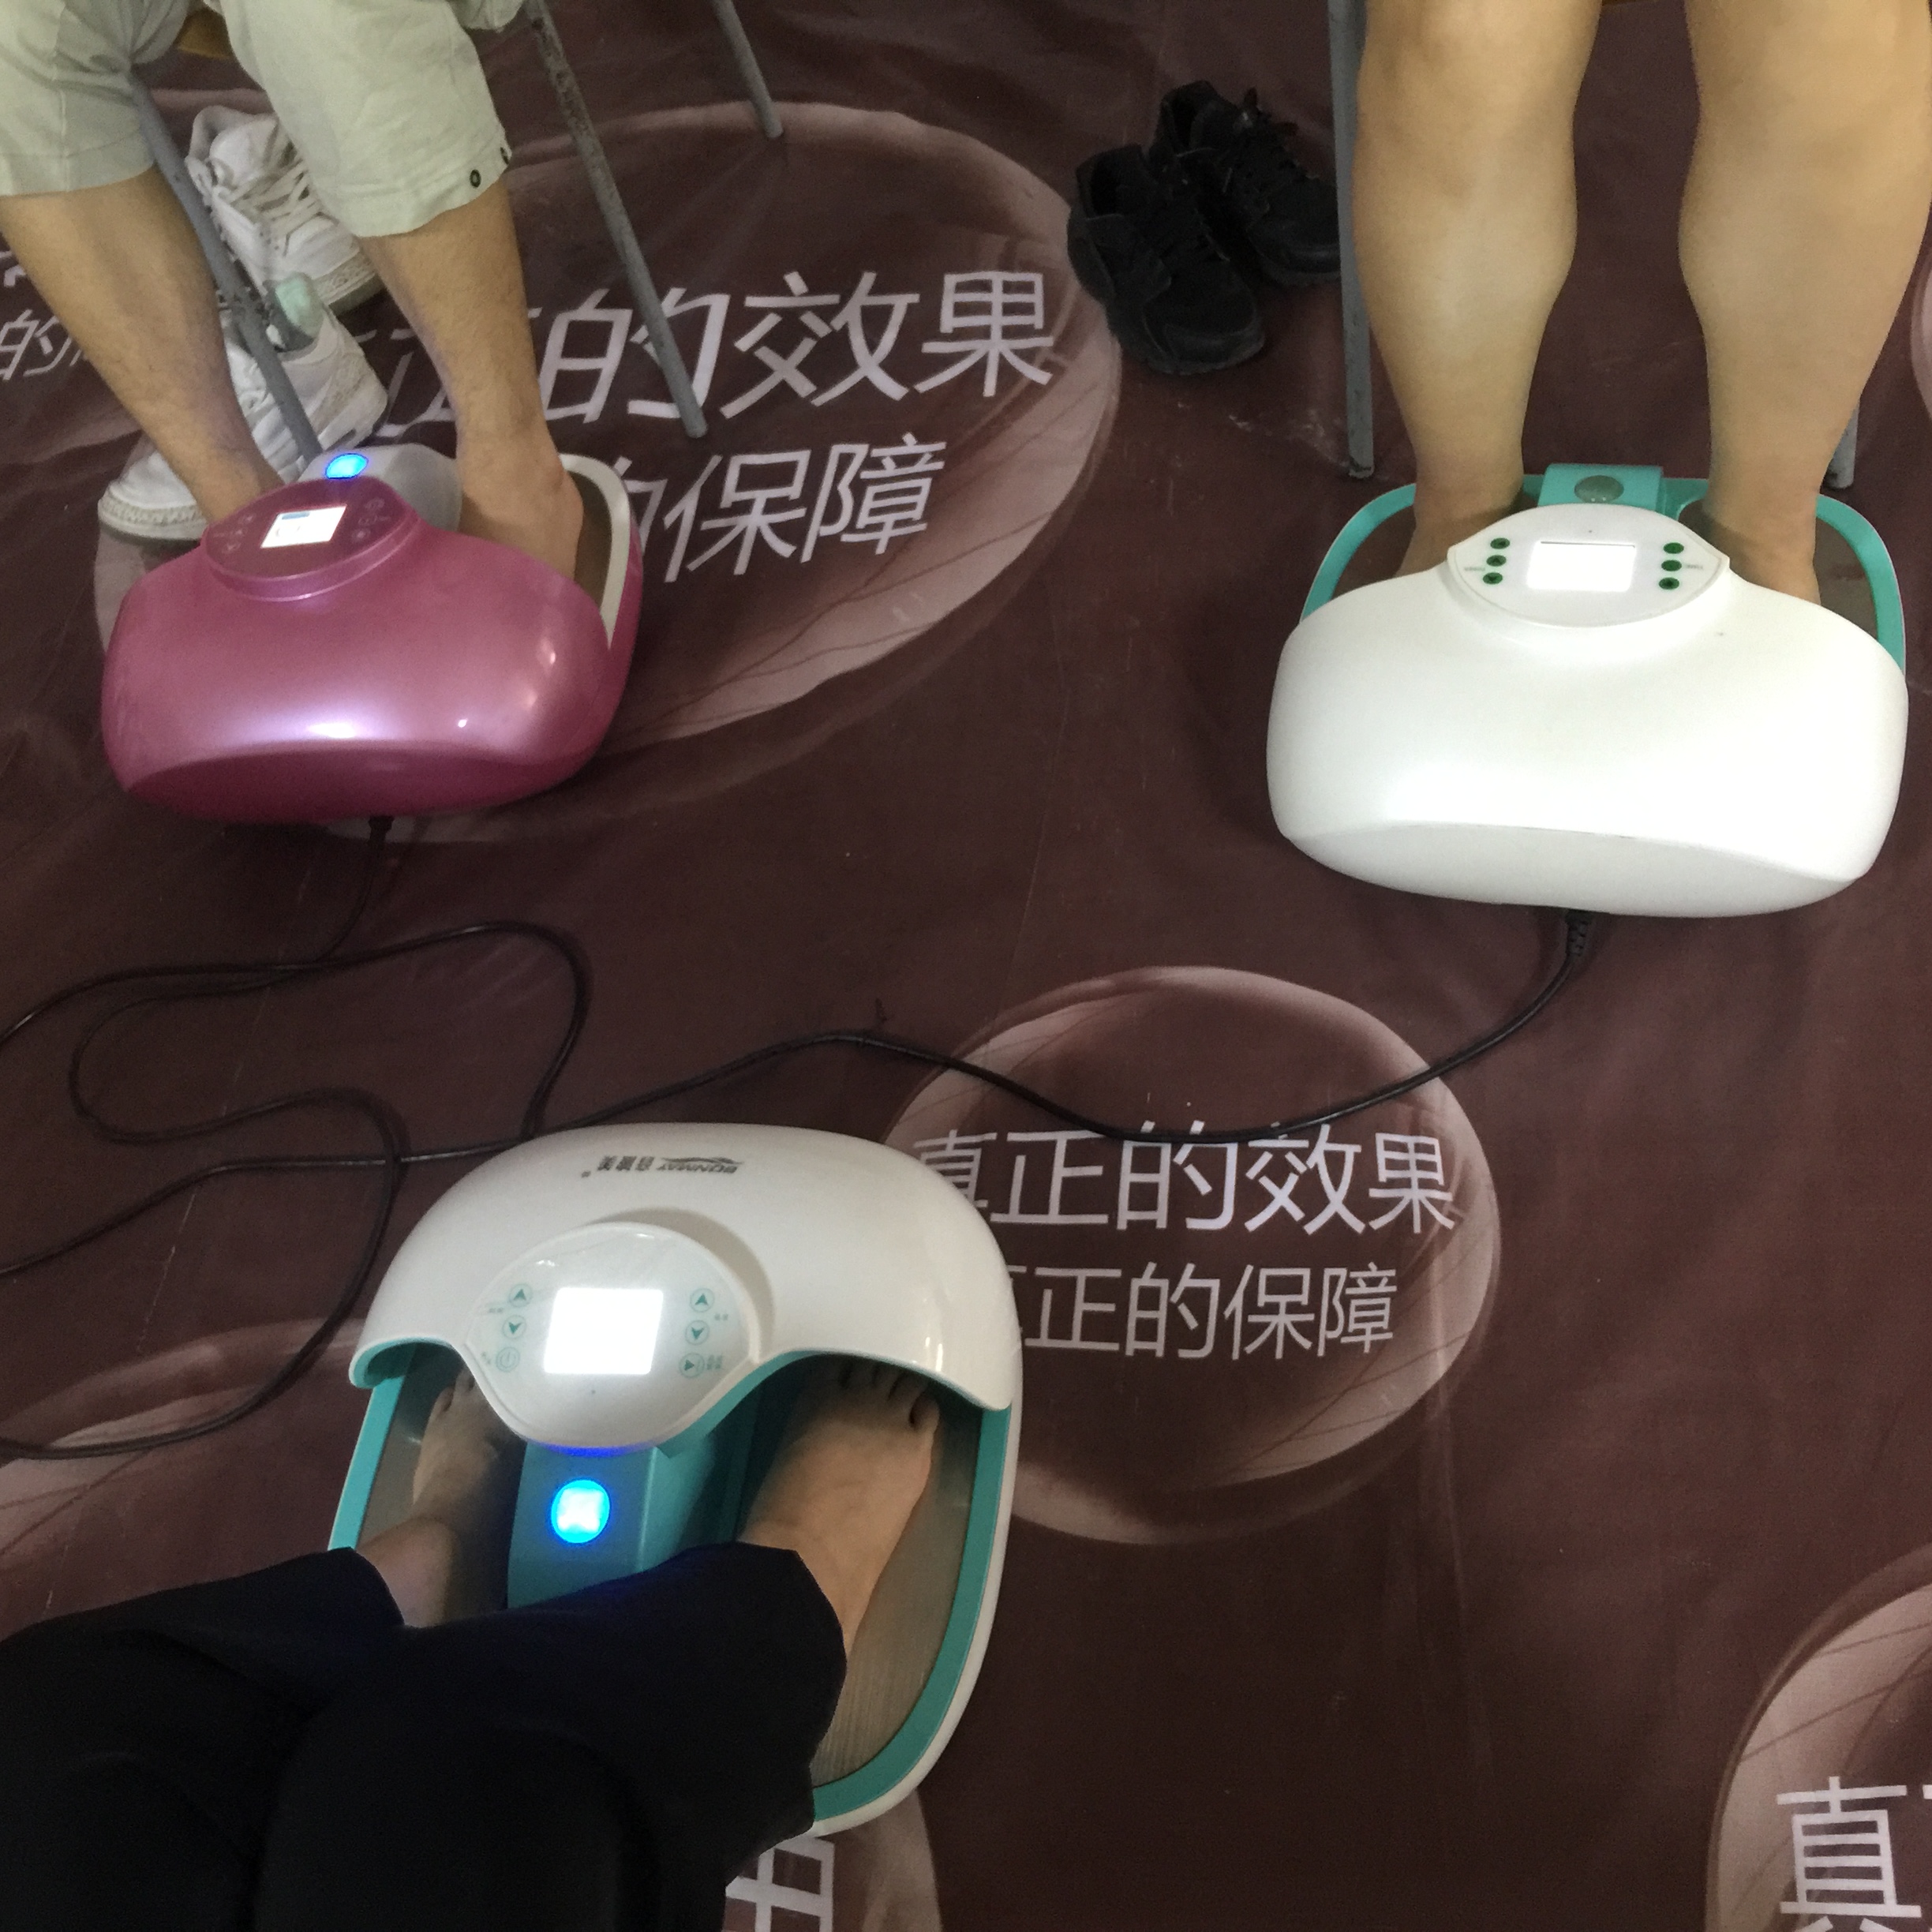 Whole foot soles massage with air pressure, smoothing infrar heating foot care device